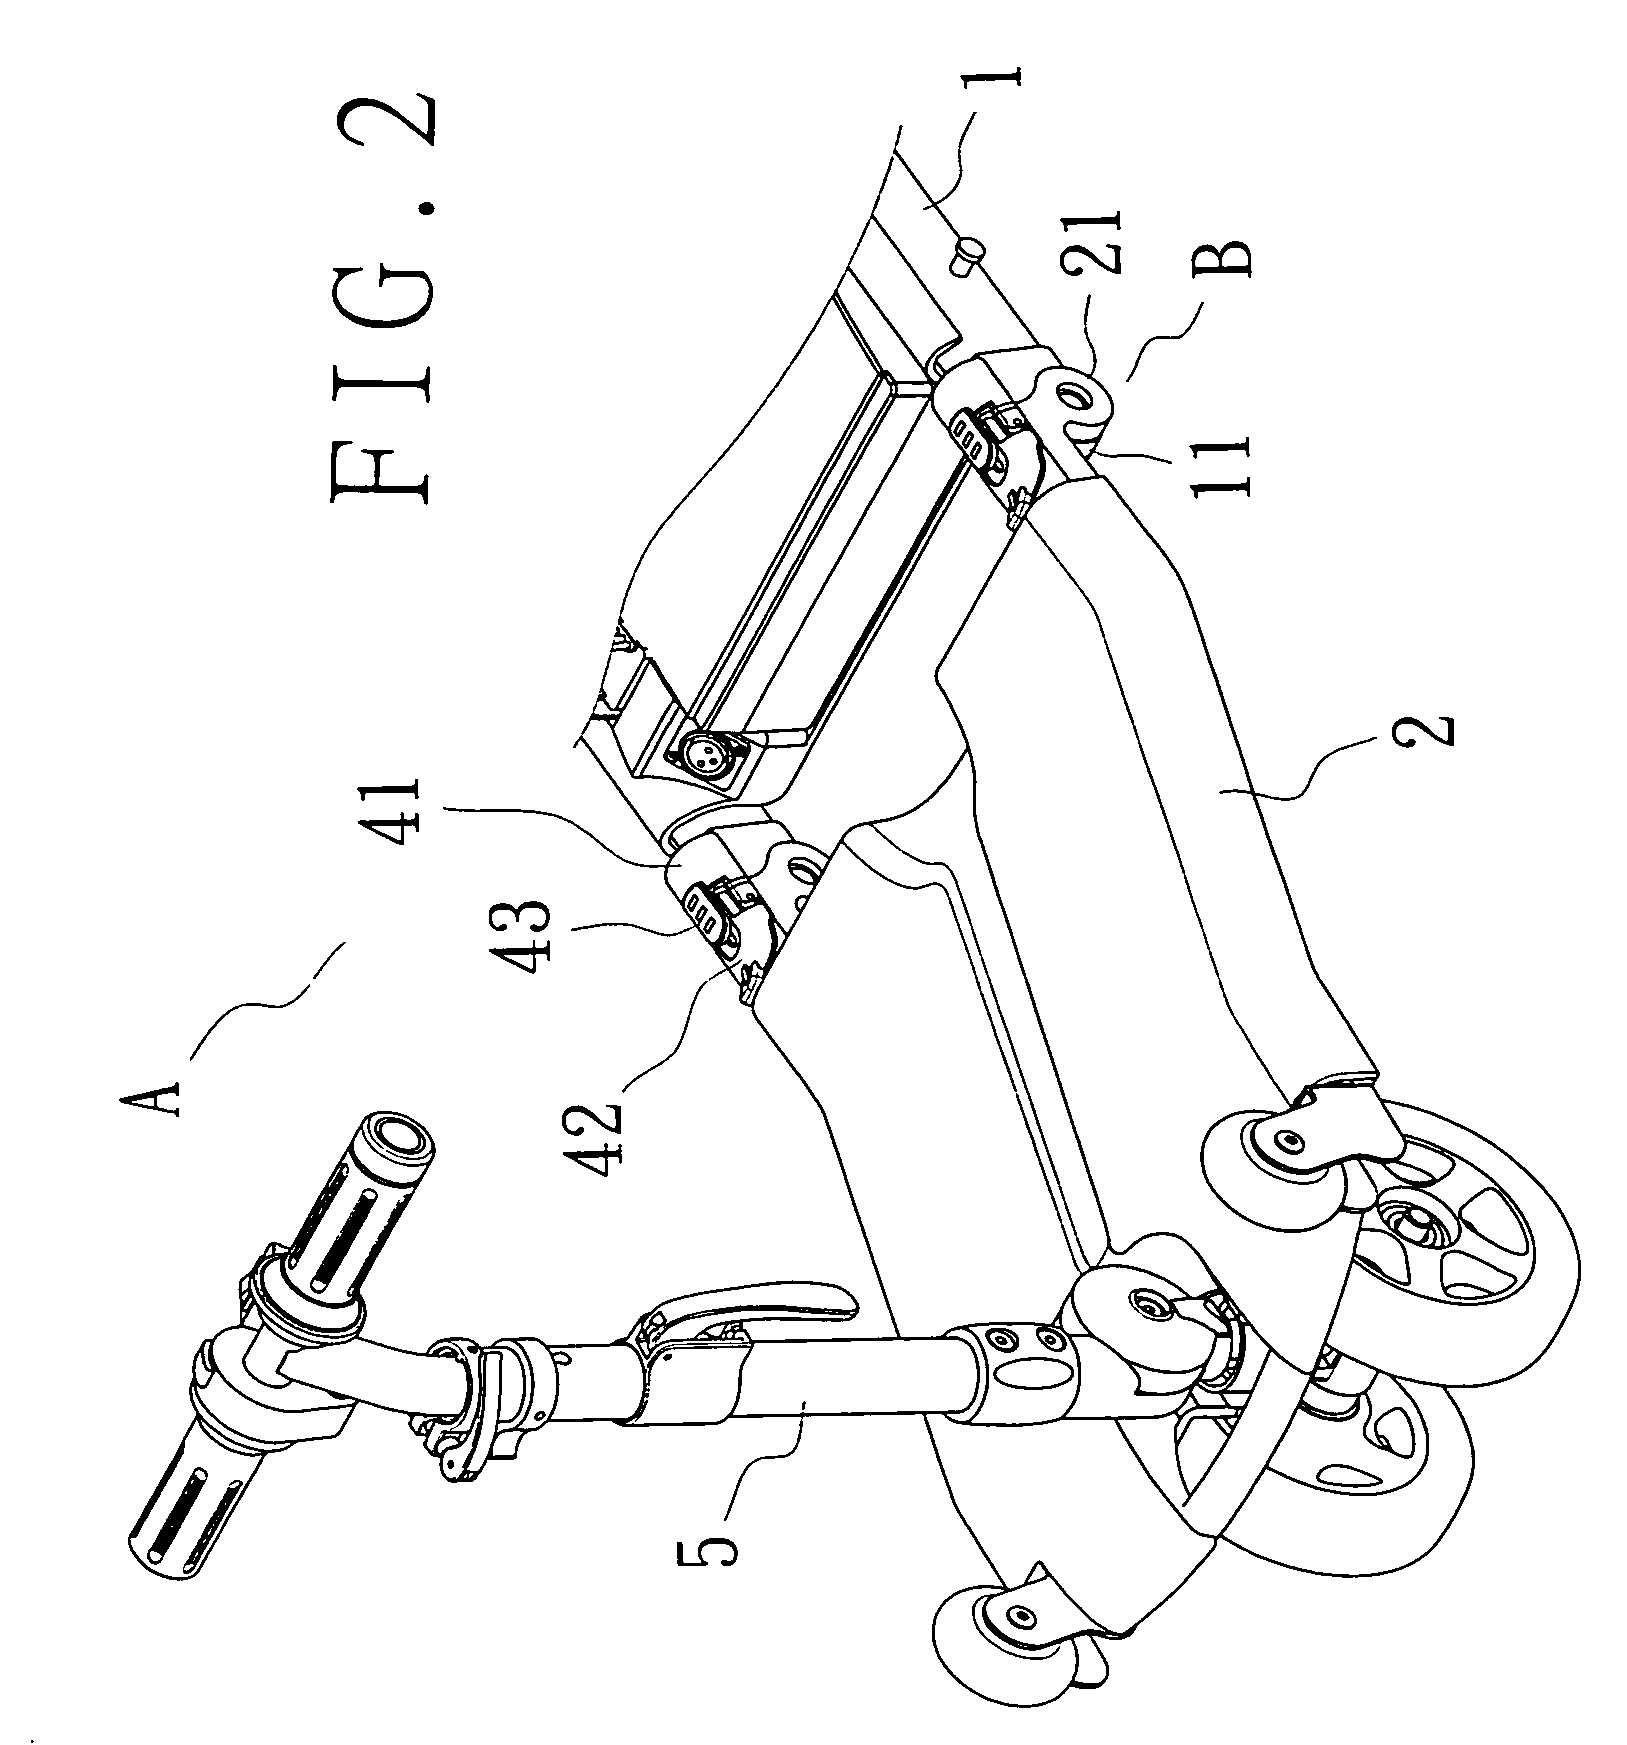 Fixing device for a foldable chassis of an electric walk-substituting vehicle